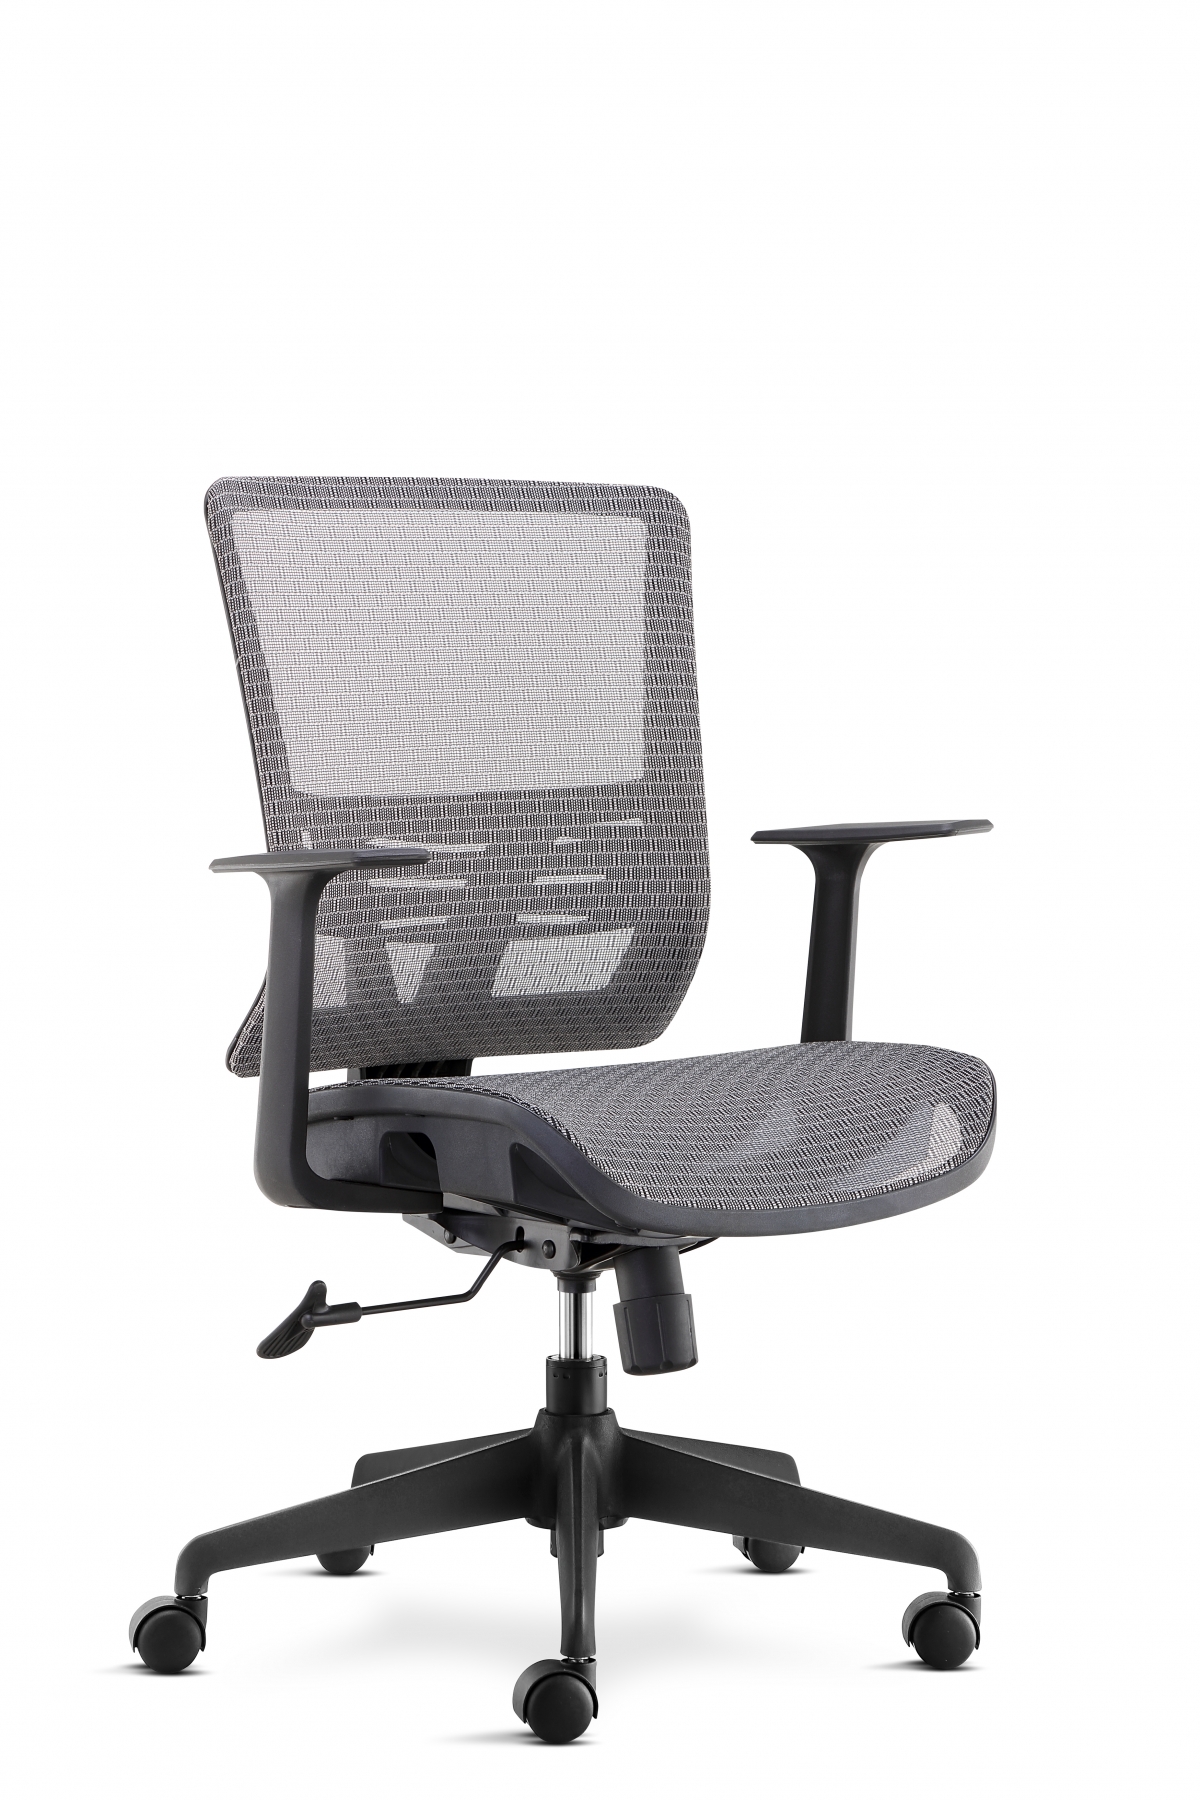 how to buy a quality mesh fabric seat office chair from china office furniture supplier-NOWA-China Office Furniture, China Custom Made Furniture,